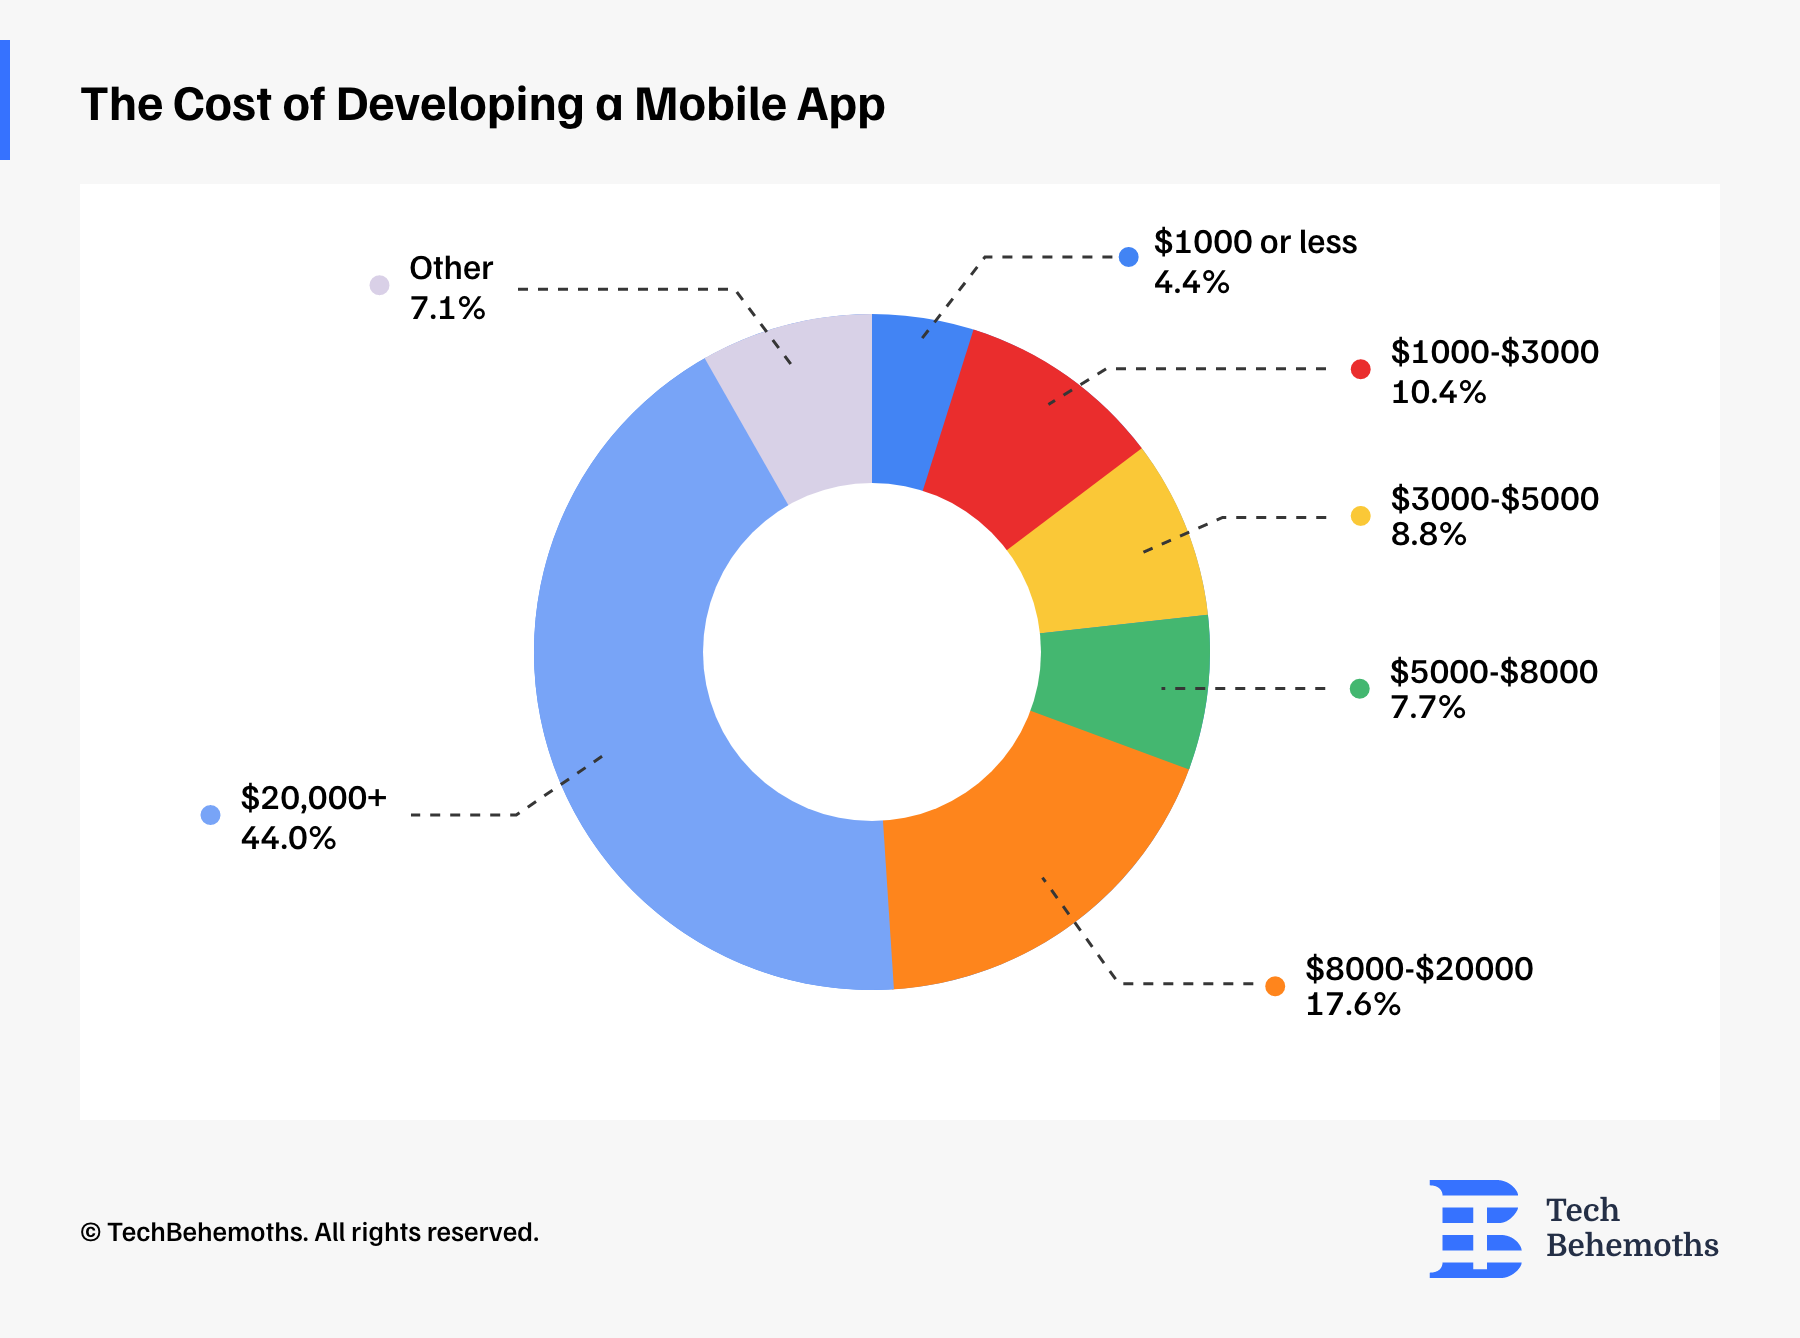 How much does it cost to develop a mobile app